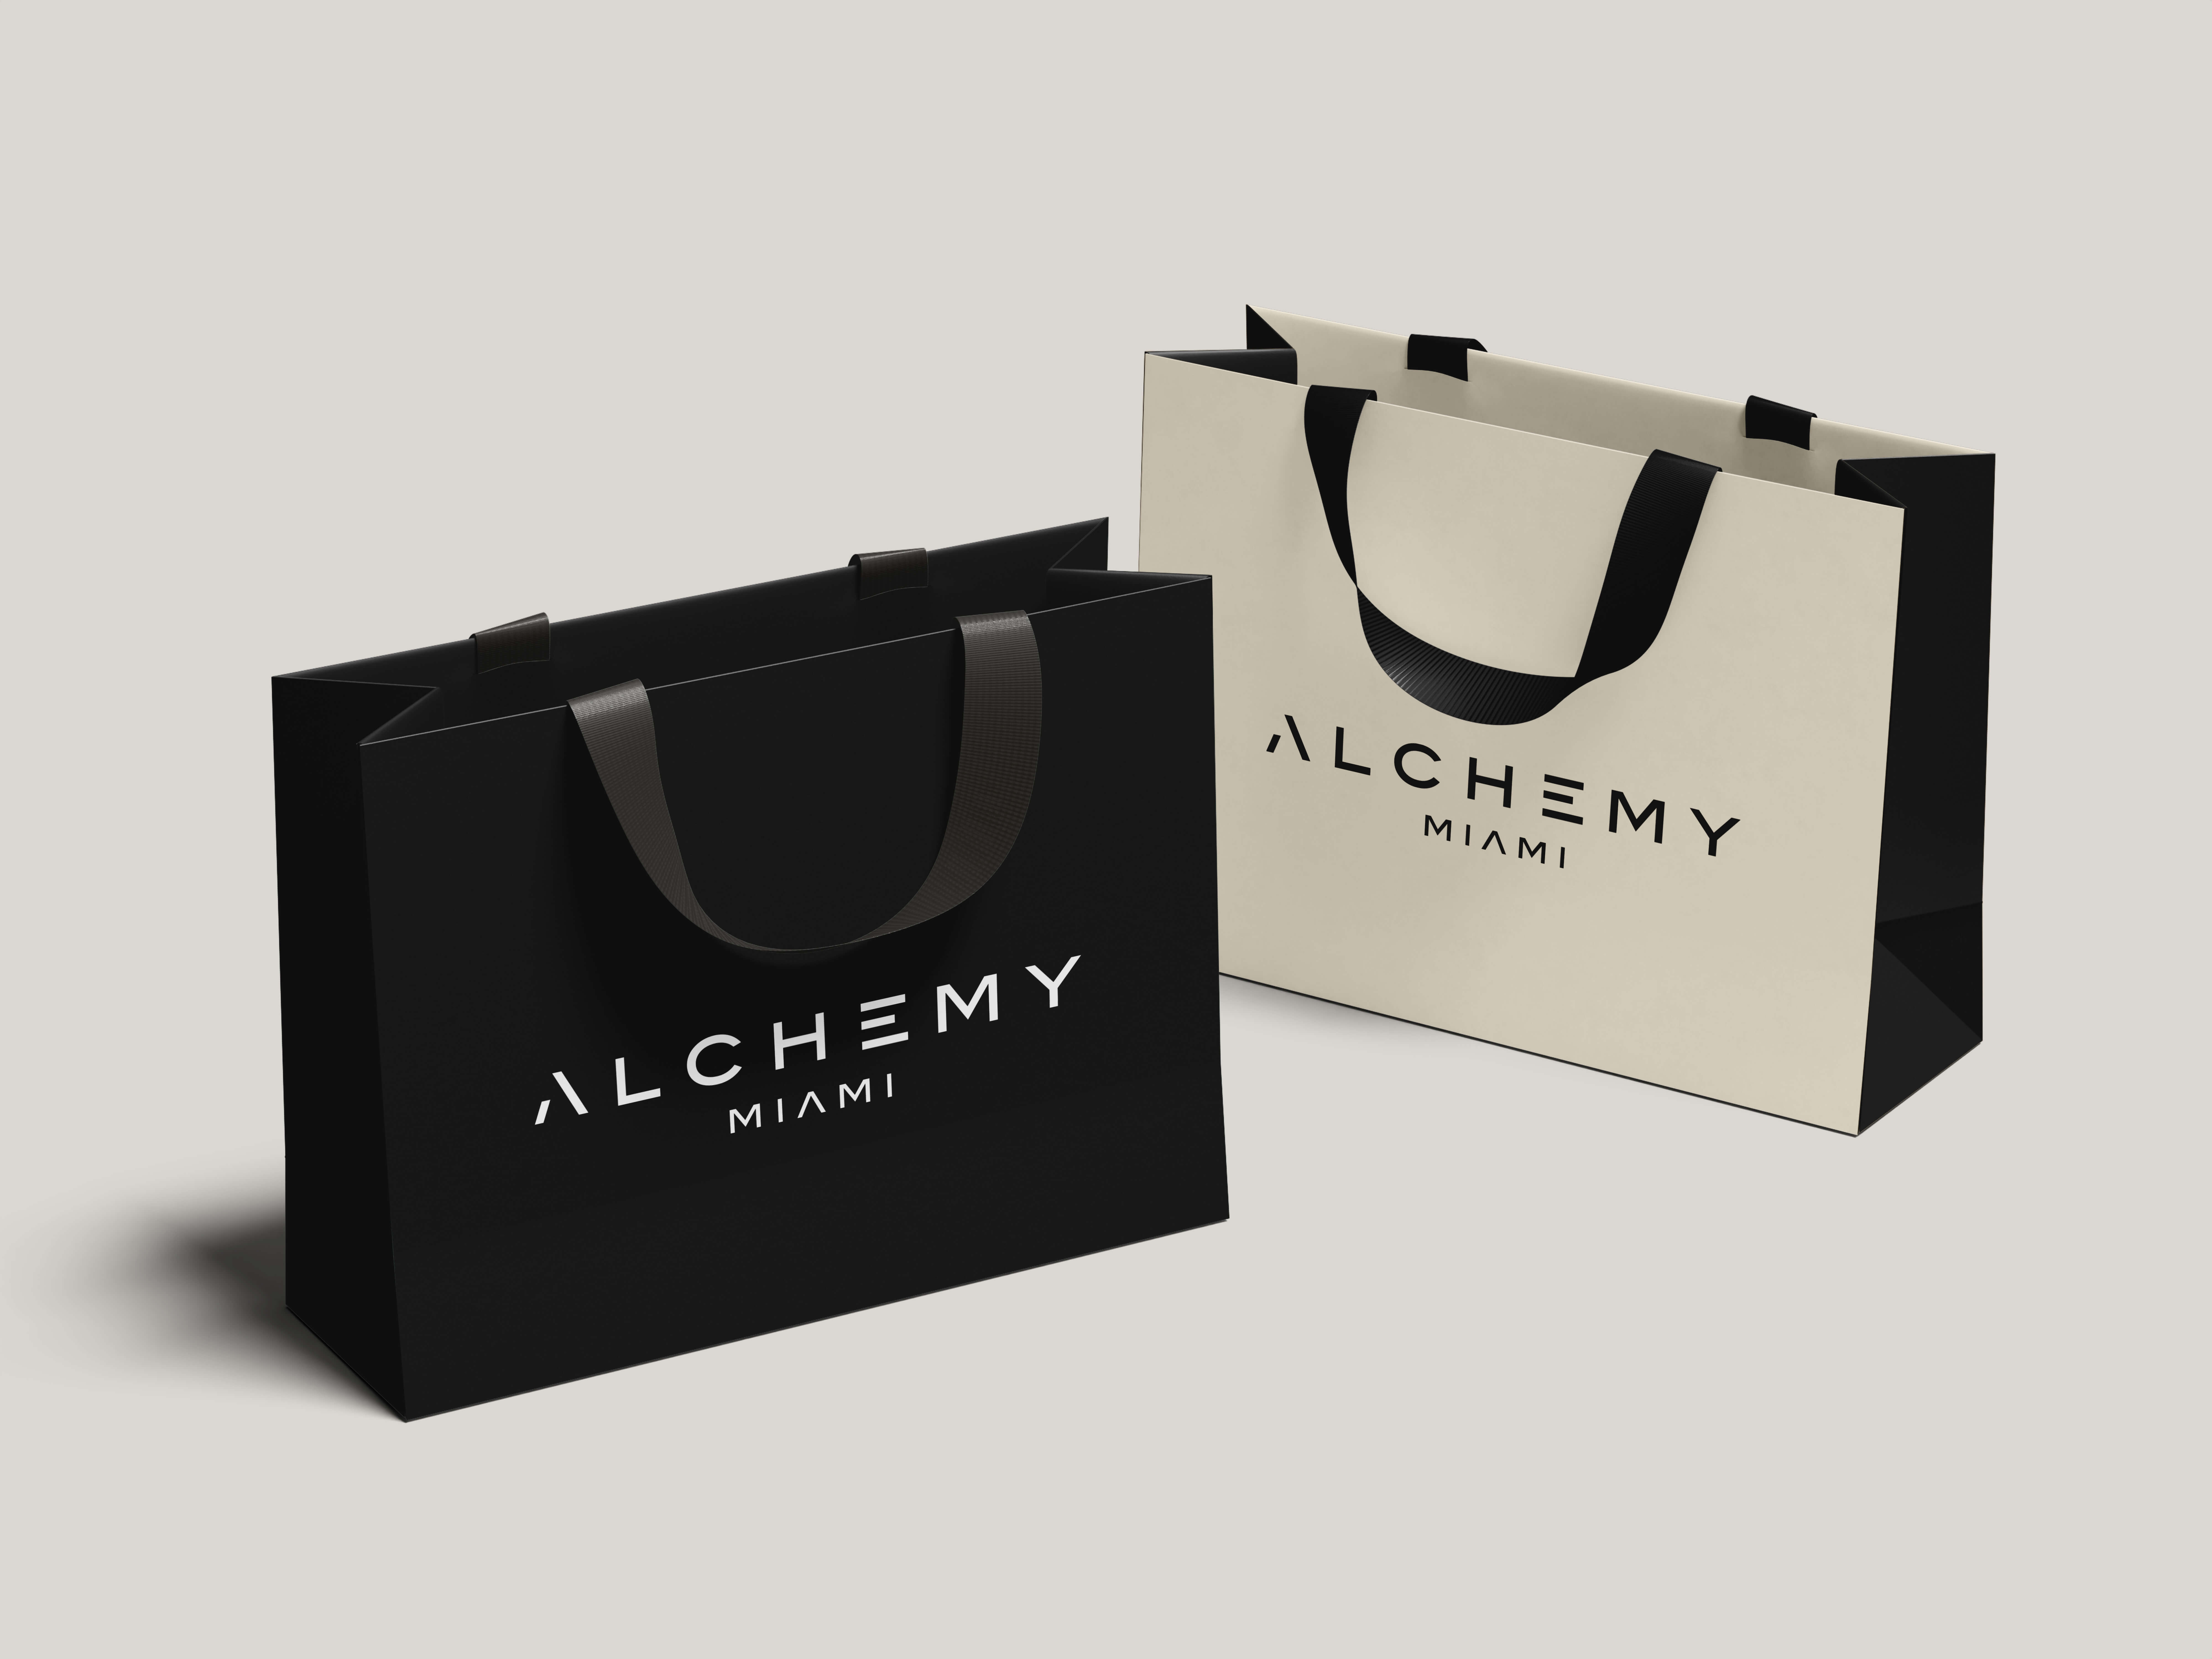 Two Alchemy branded bags. One white and one black with Alchemy logo in the center of the bag